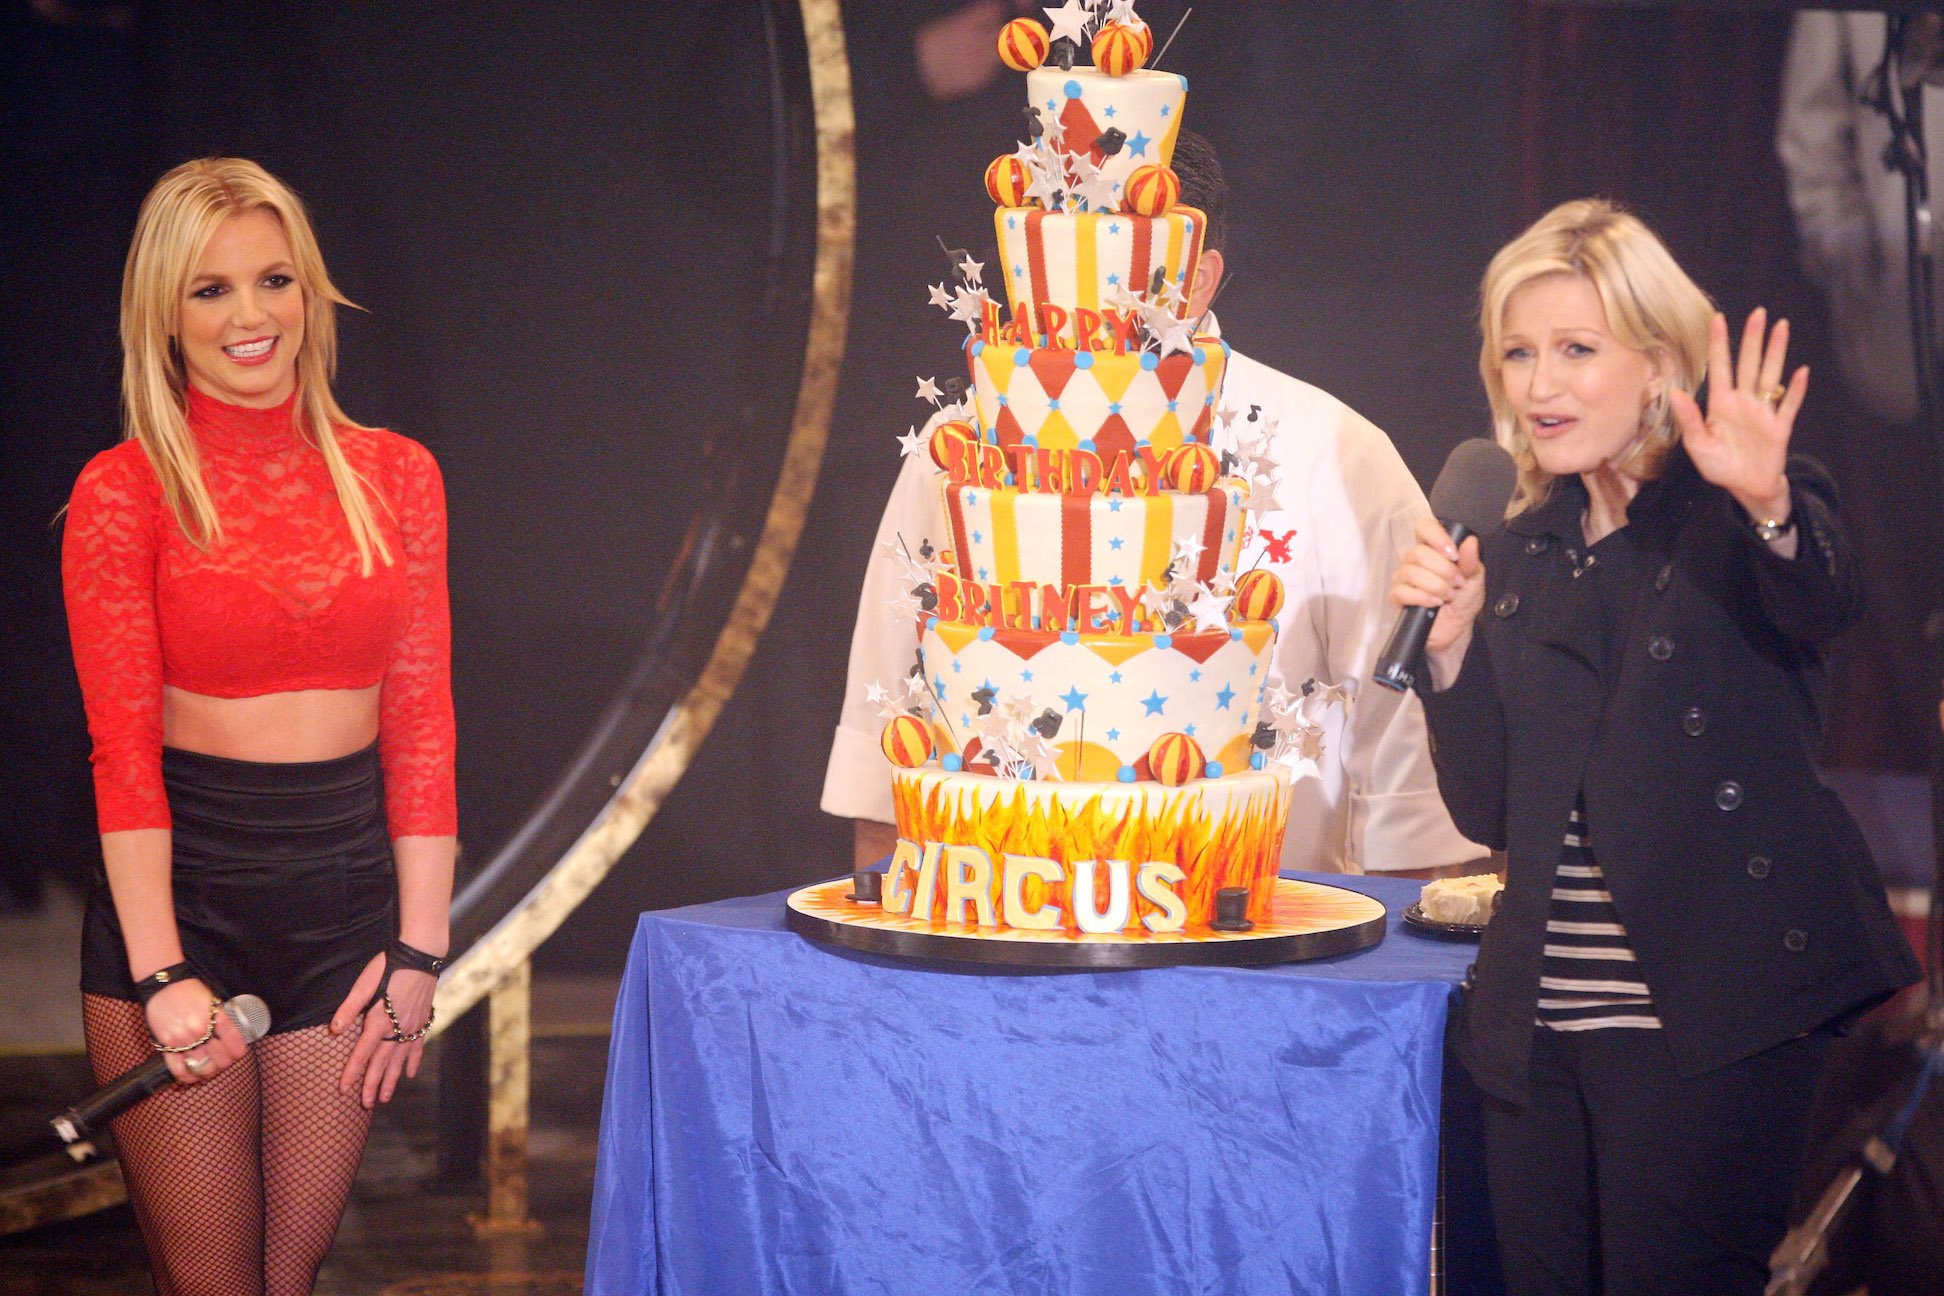 Britney Spears performing next to a birthday cake and Diane Sawyer